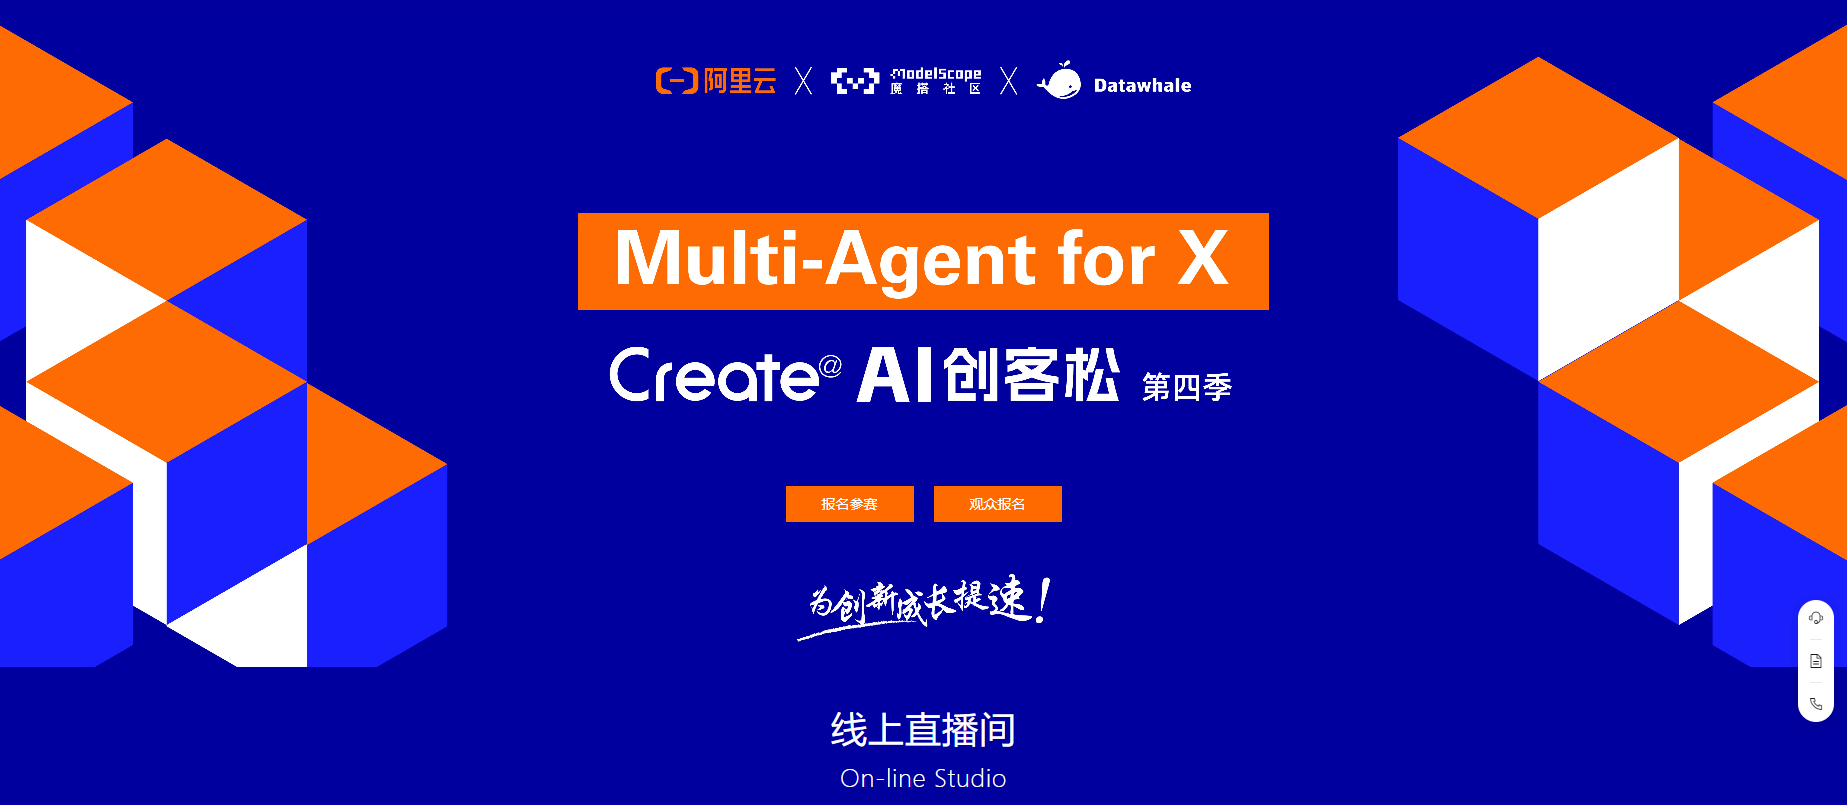 Multi-Agent for X AI创客松第四季